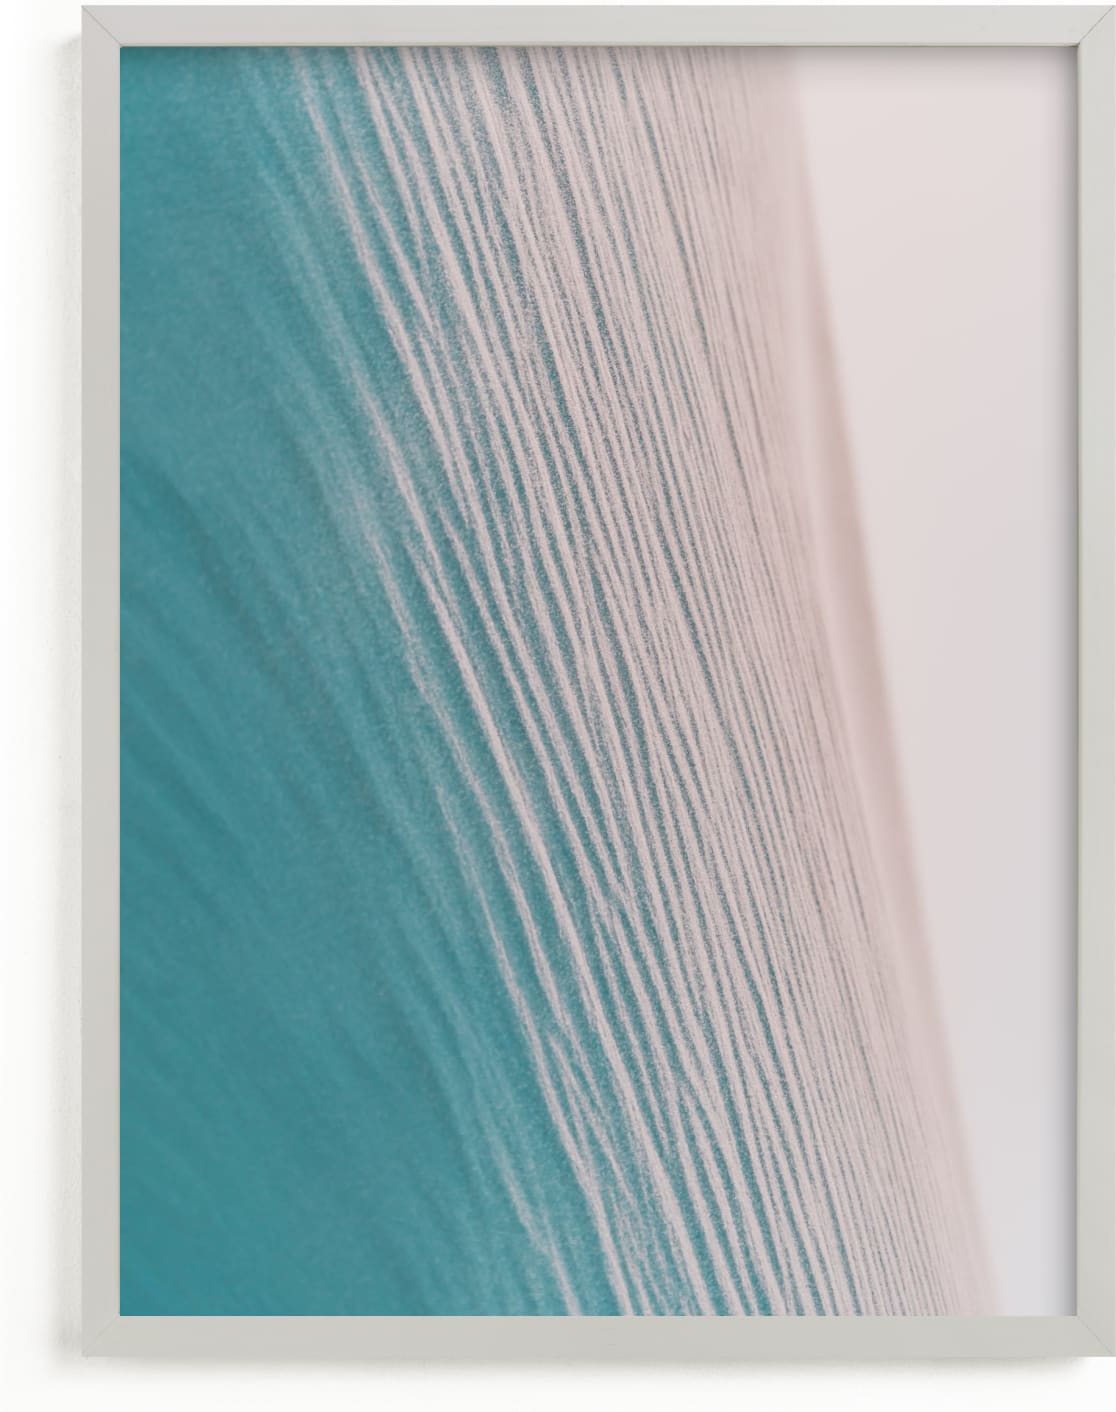 This is a blue art by Courtney Crane called Striations.